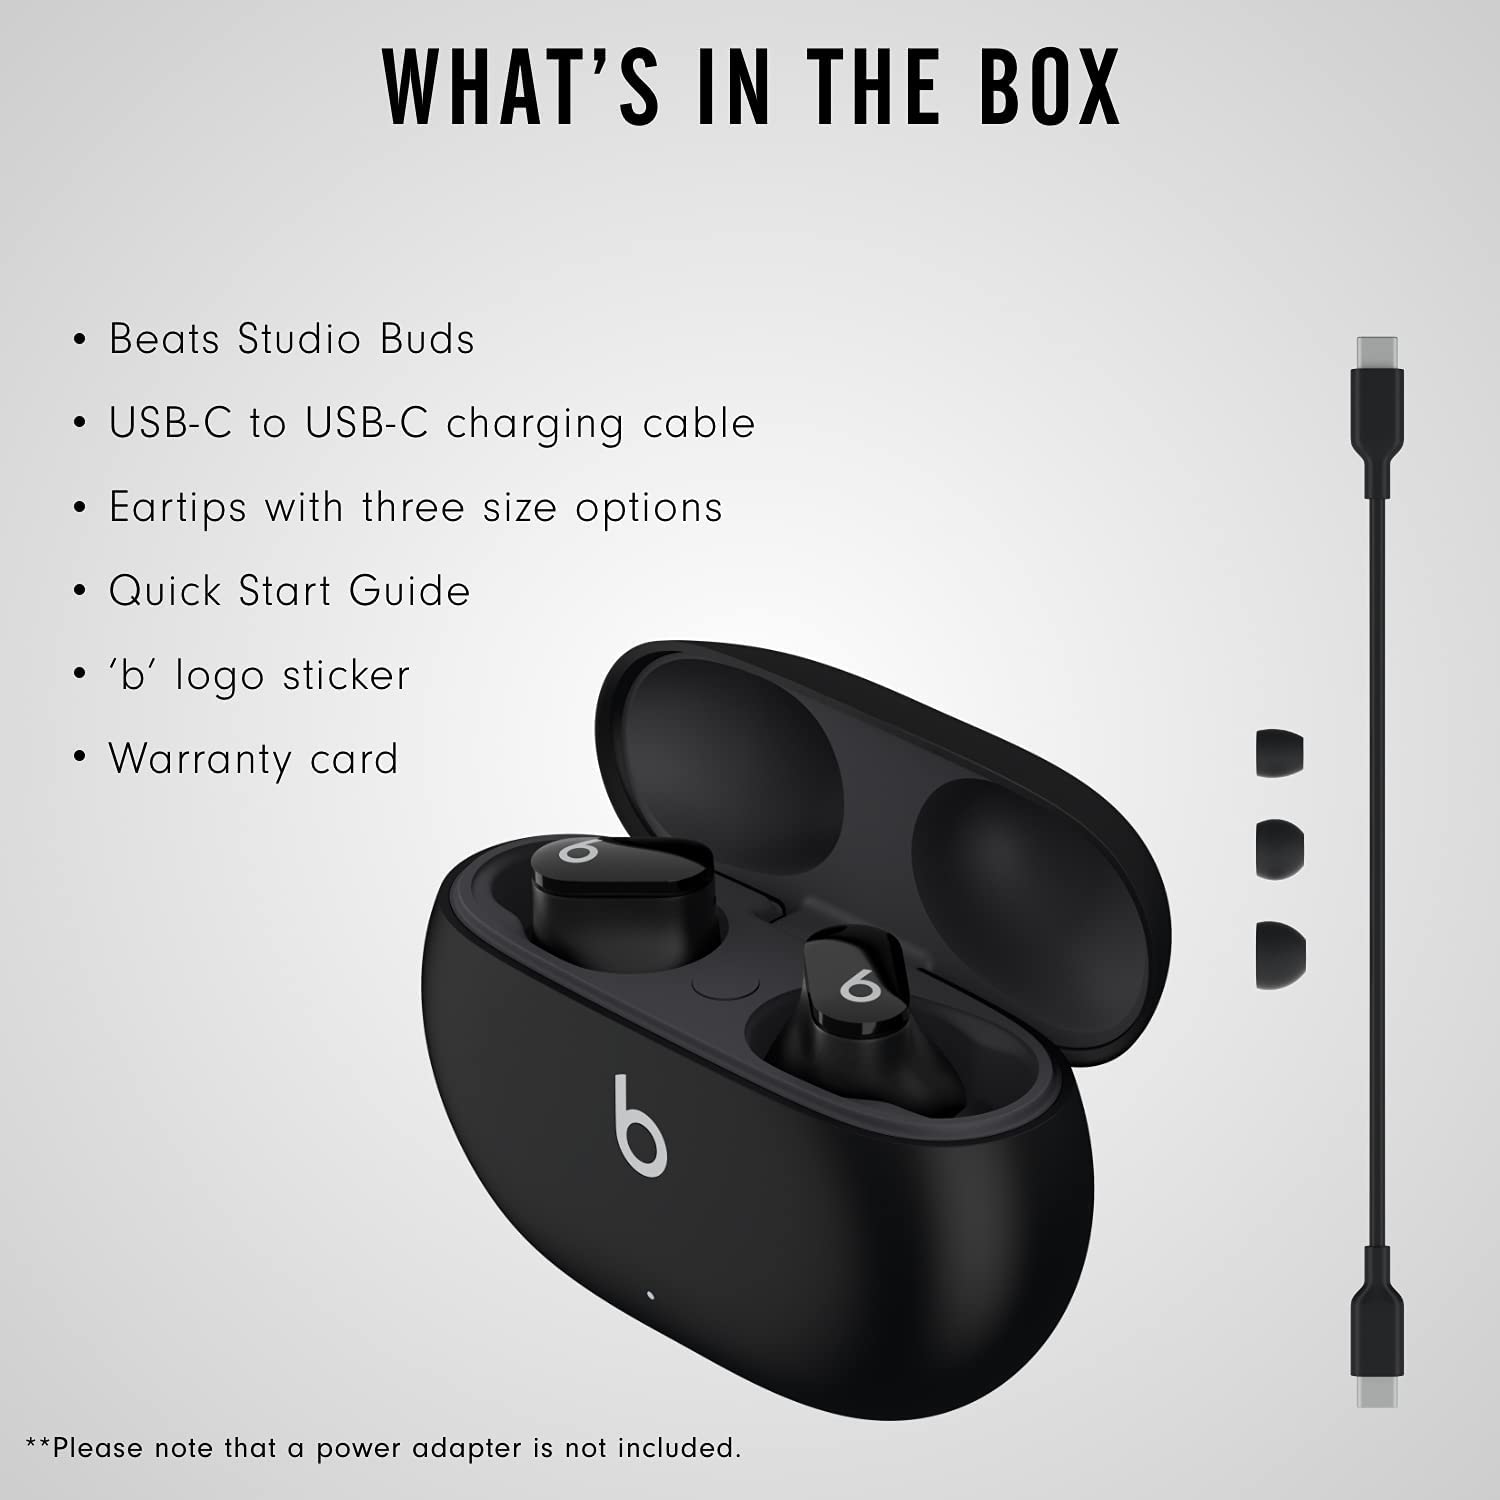 This image shows what's in the box of the Beats Studio Buds.